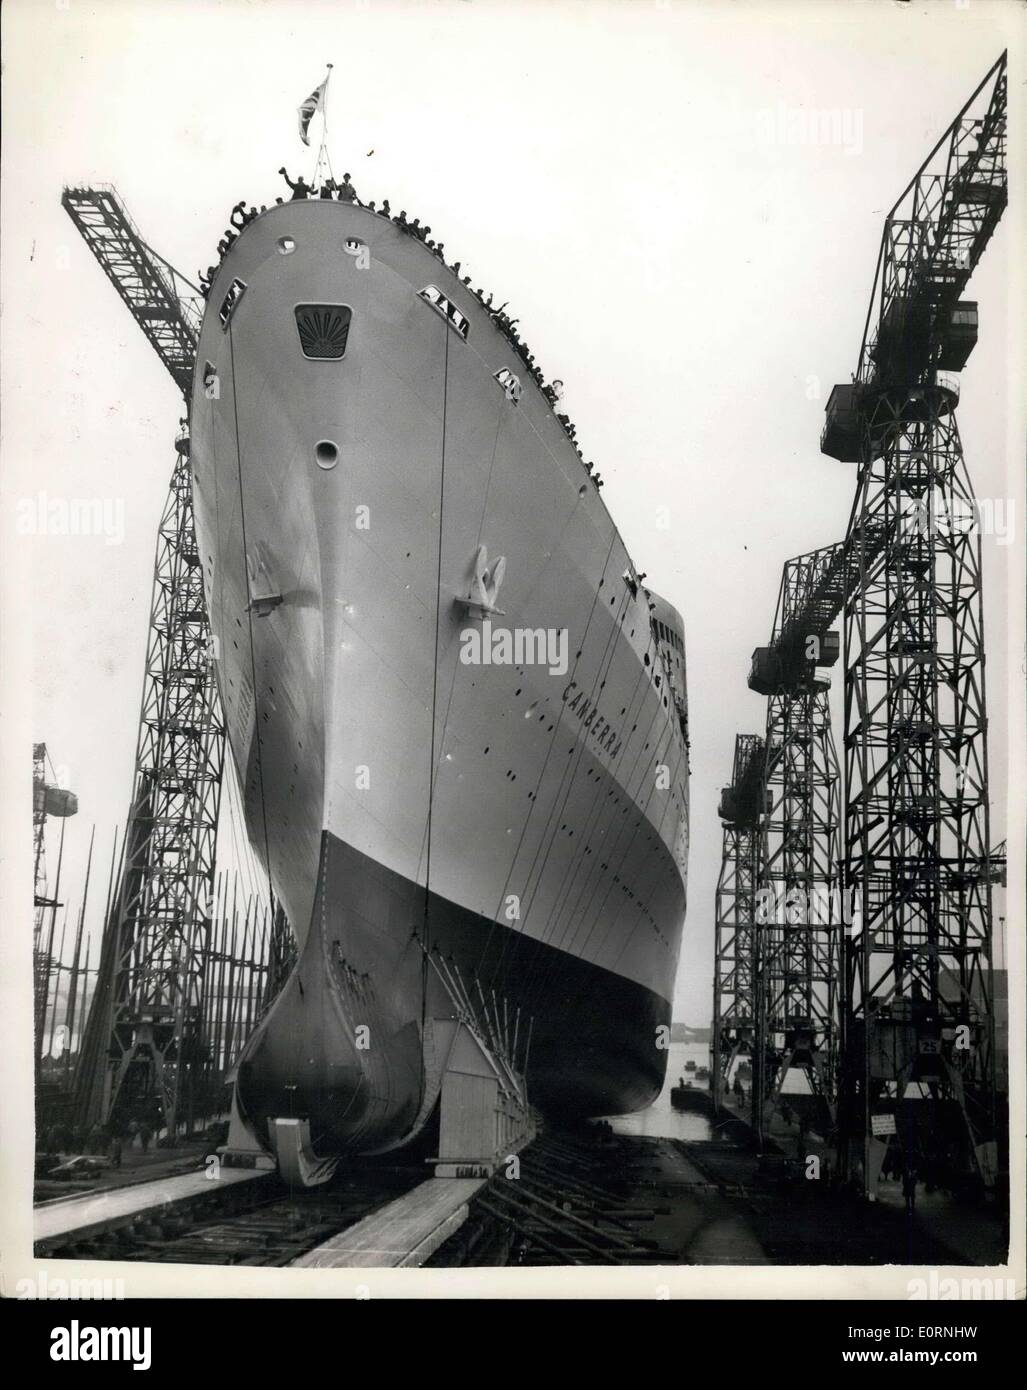 Mar. 16, 1960 - Dame Pattie Menzies launches Britain's Newest liner. The ''Canberra'': Dame Pattie Menzies wife of the Australian Prime Minister this afternoon launched the 45,000 ton Canberra - Britain's newest liner for the London - Sydney route - P. and C. line. With her speed of 27 knots she will out the time for the journey from 31 to 25 days. She will carry 2,235 passengers -cist ?15,000,000 to build - has 15 decks - and is 830 ft. long. Built in Belfast. Photo shows view of the liner as she slides down the slipway - at the Harland and Wolff Shipyard, Belfast this afternoon. Stock Photo